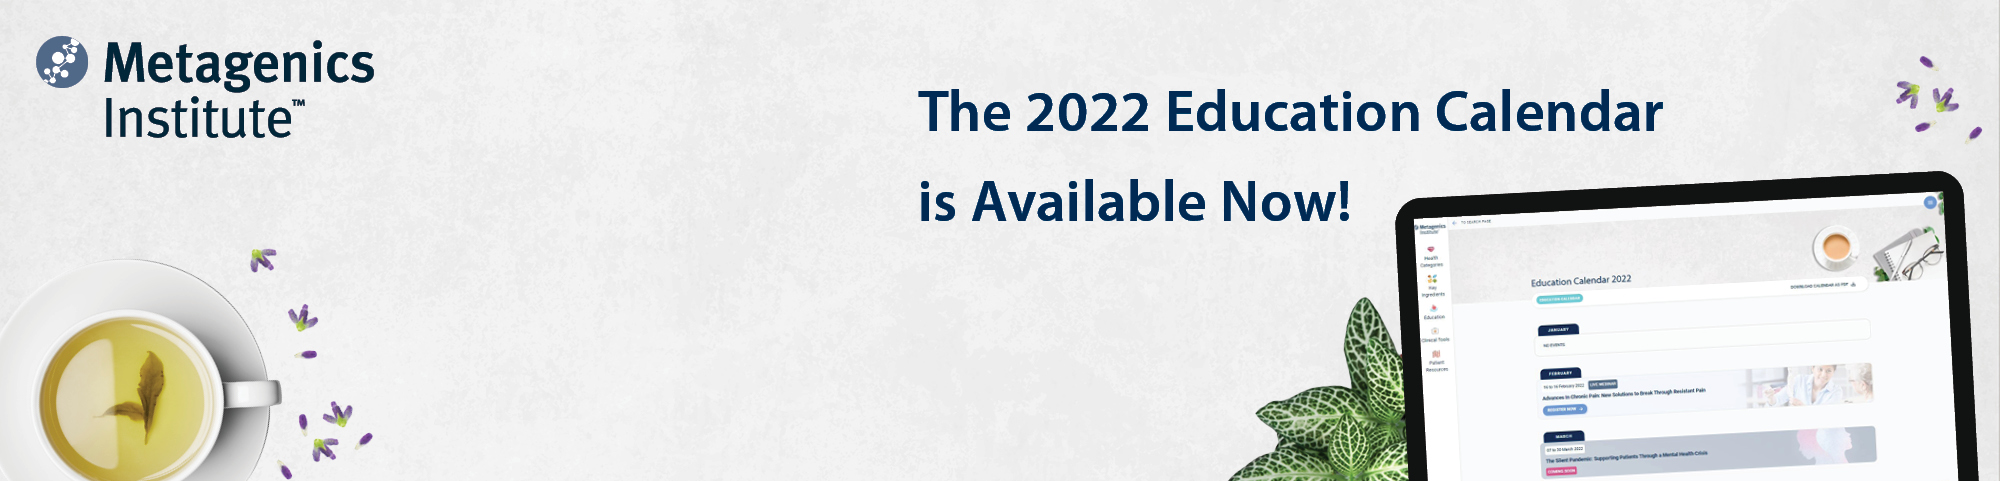 The 2022 Education Calendar is Available Now!